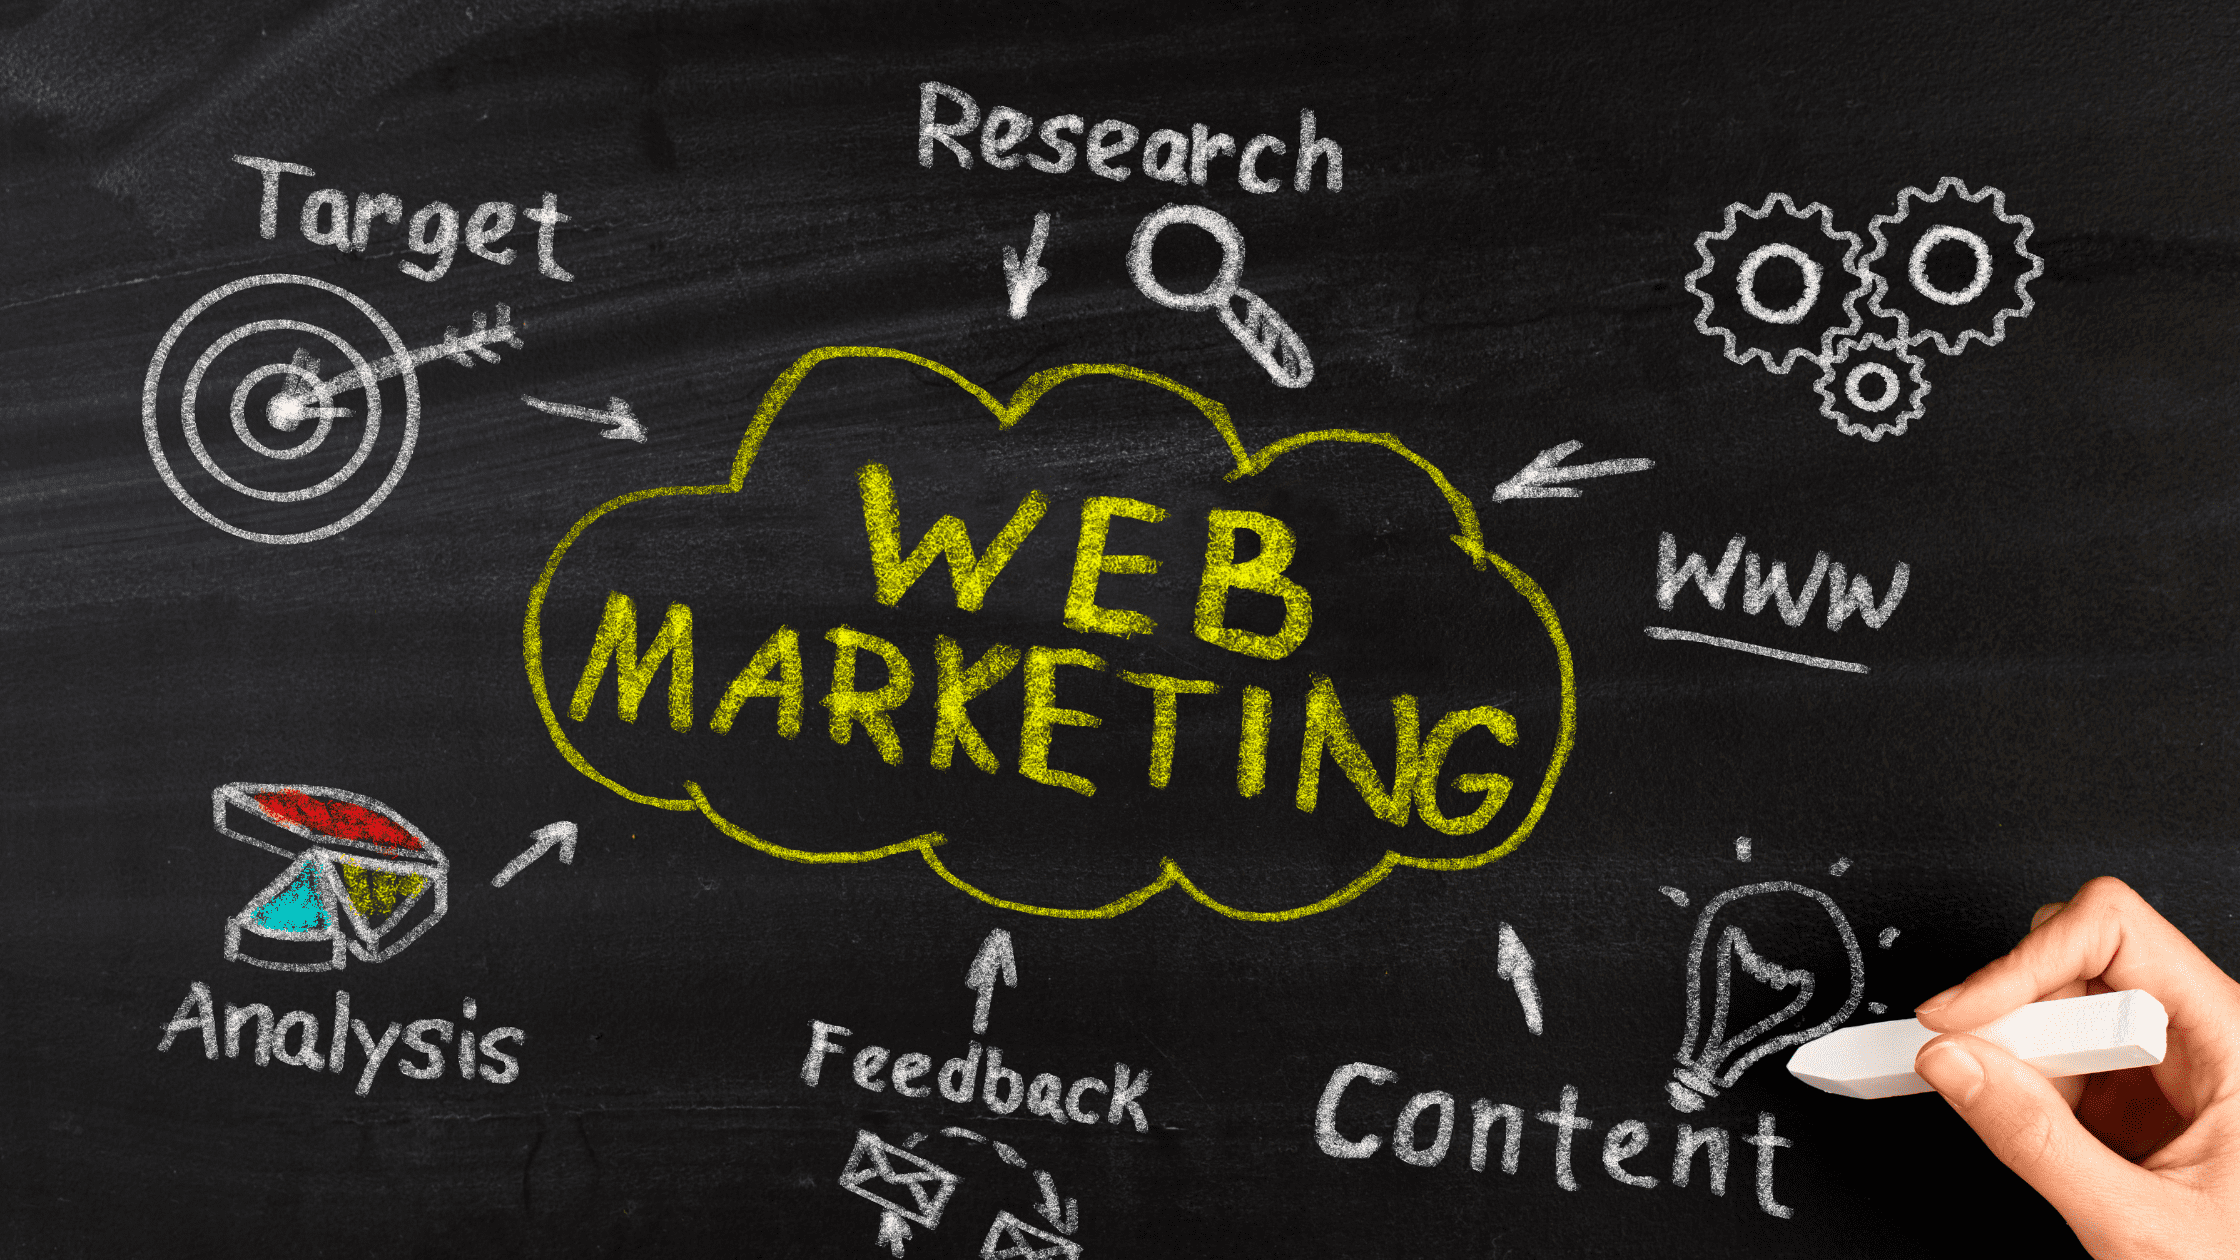 the importance of marketing your business online